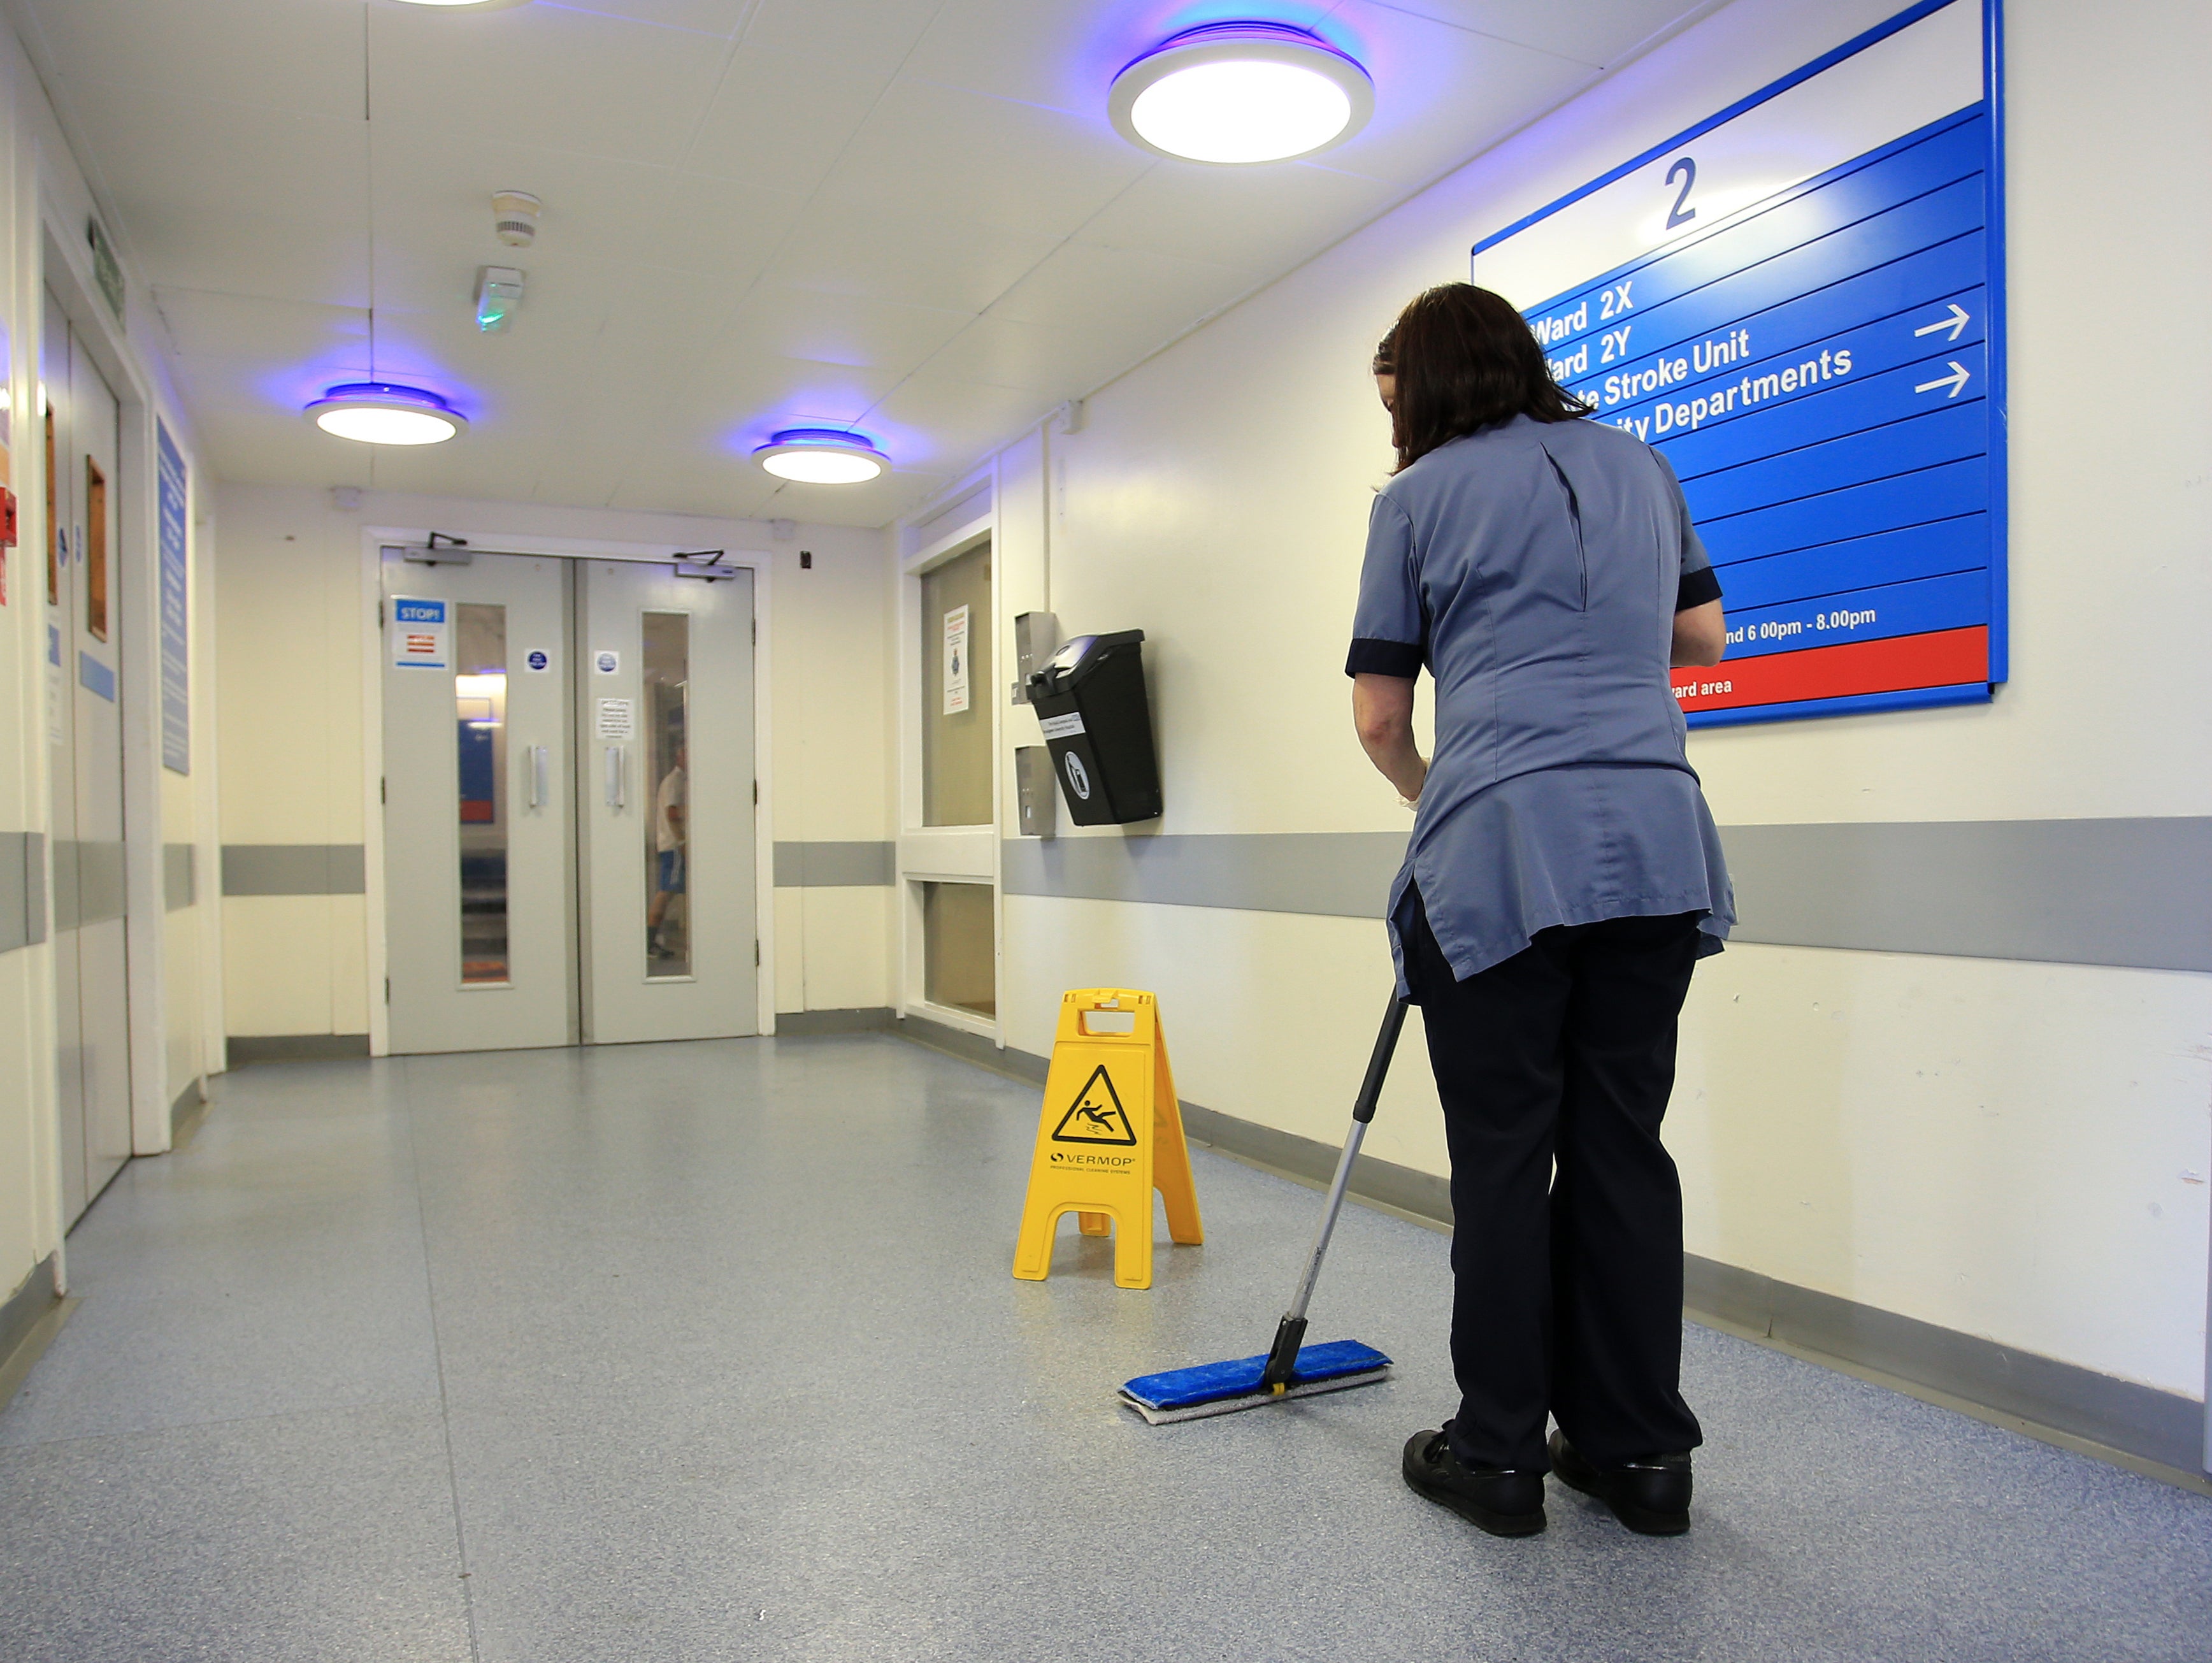 Some hospitals reported hundreds of clinical incidents linked to their poor infrastructure